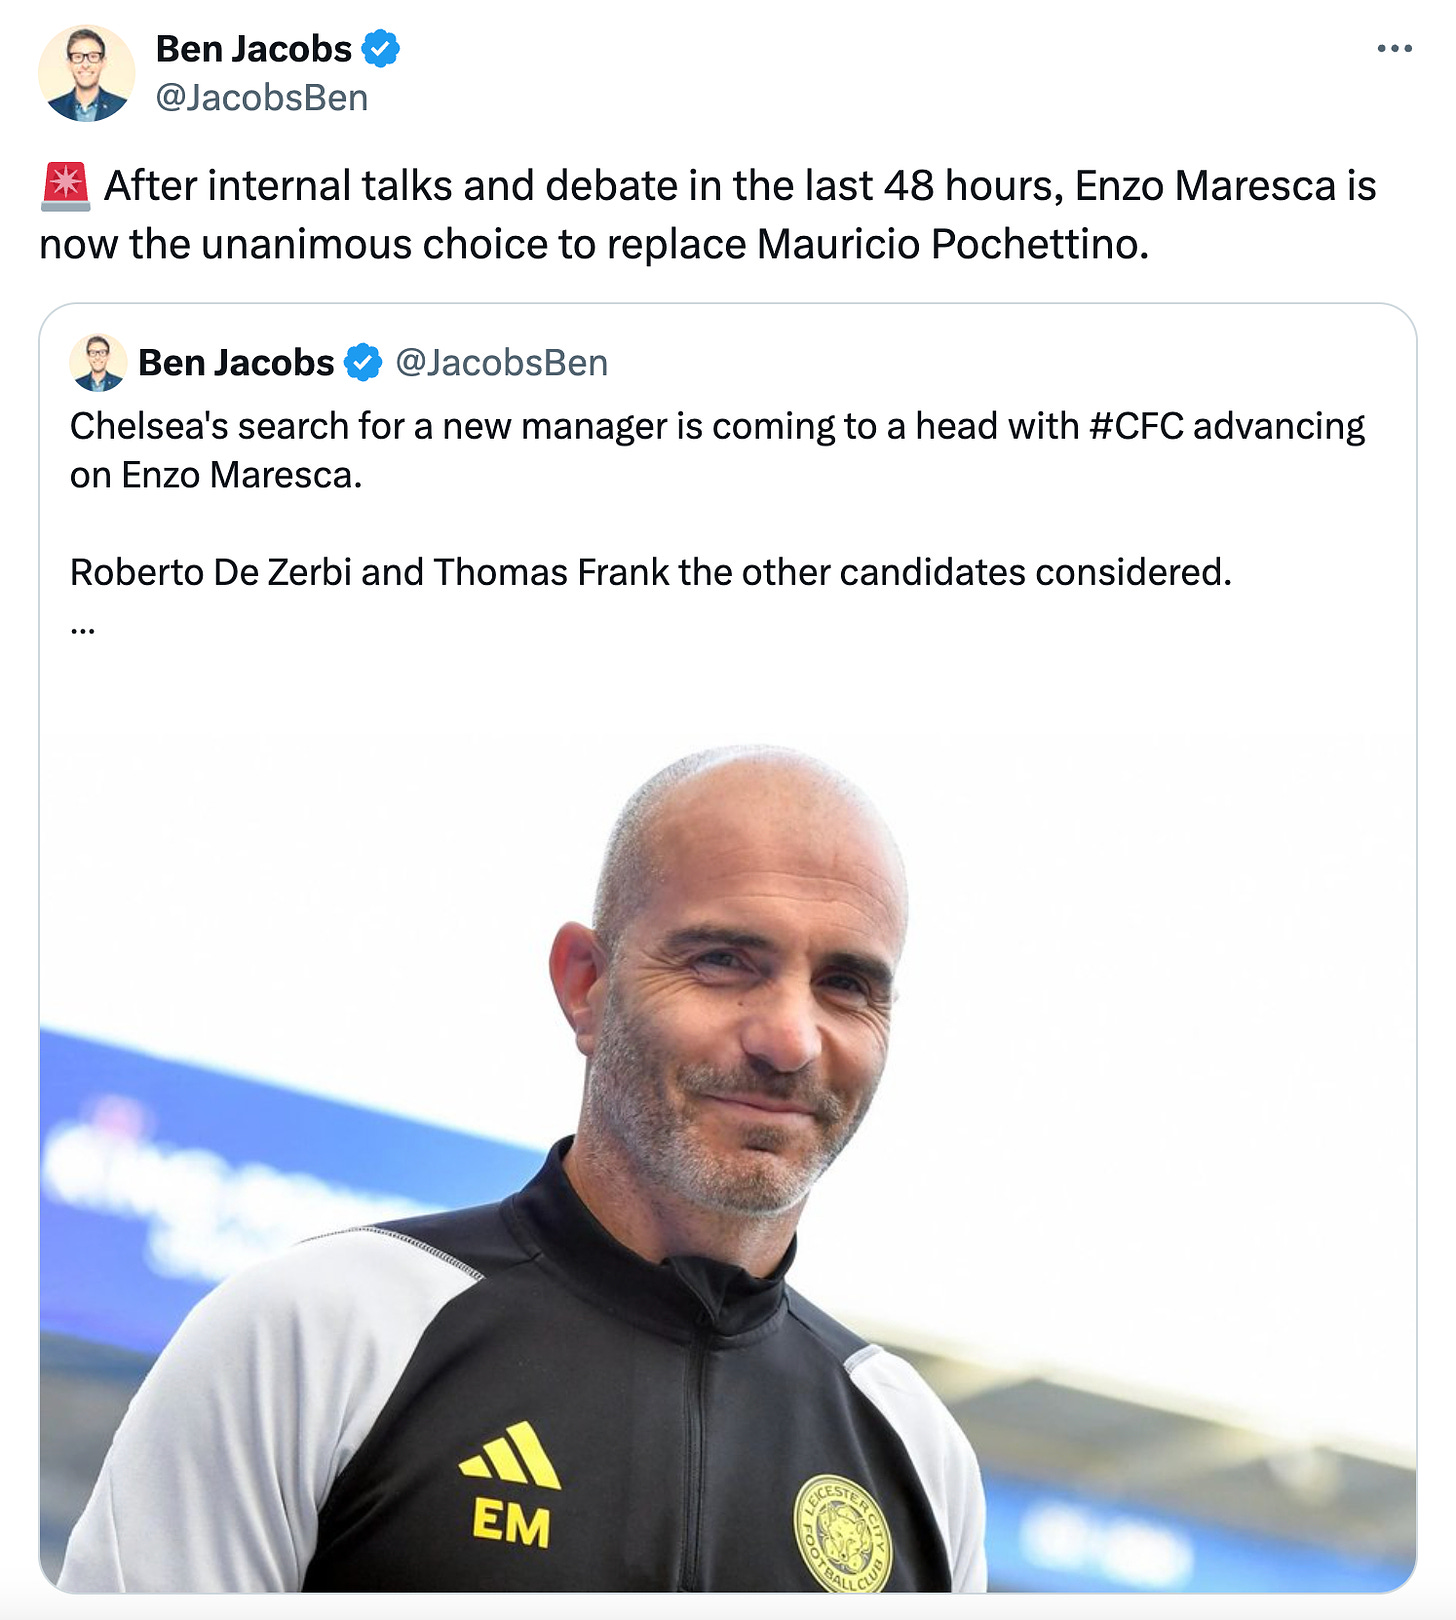 A tweet by Ben Jacobs about Enzo Maresca being the unanimous choice to replace Mauricio Pochettino as Chelsea manager